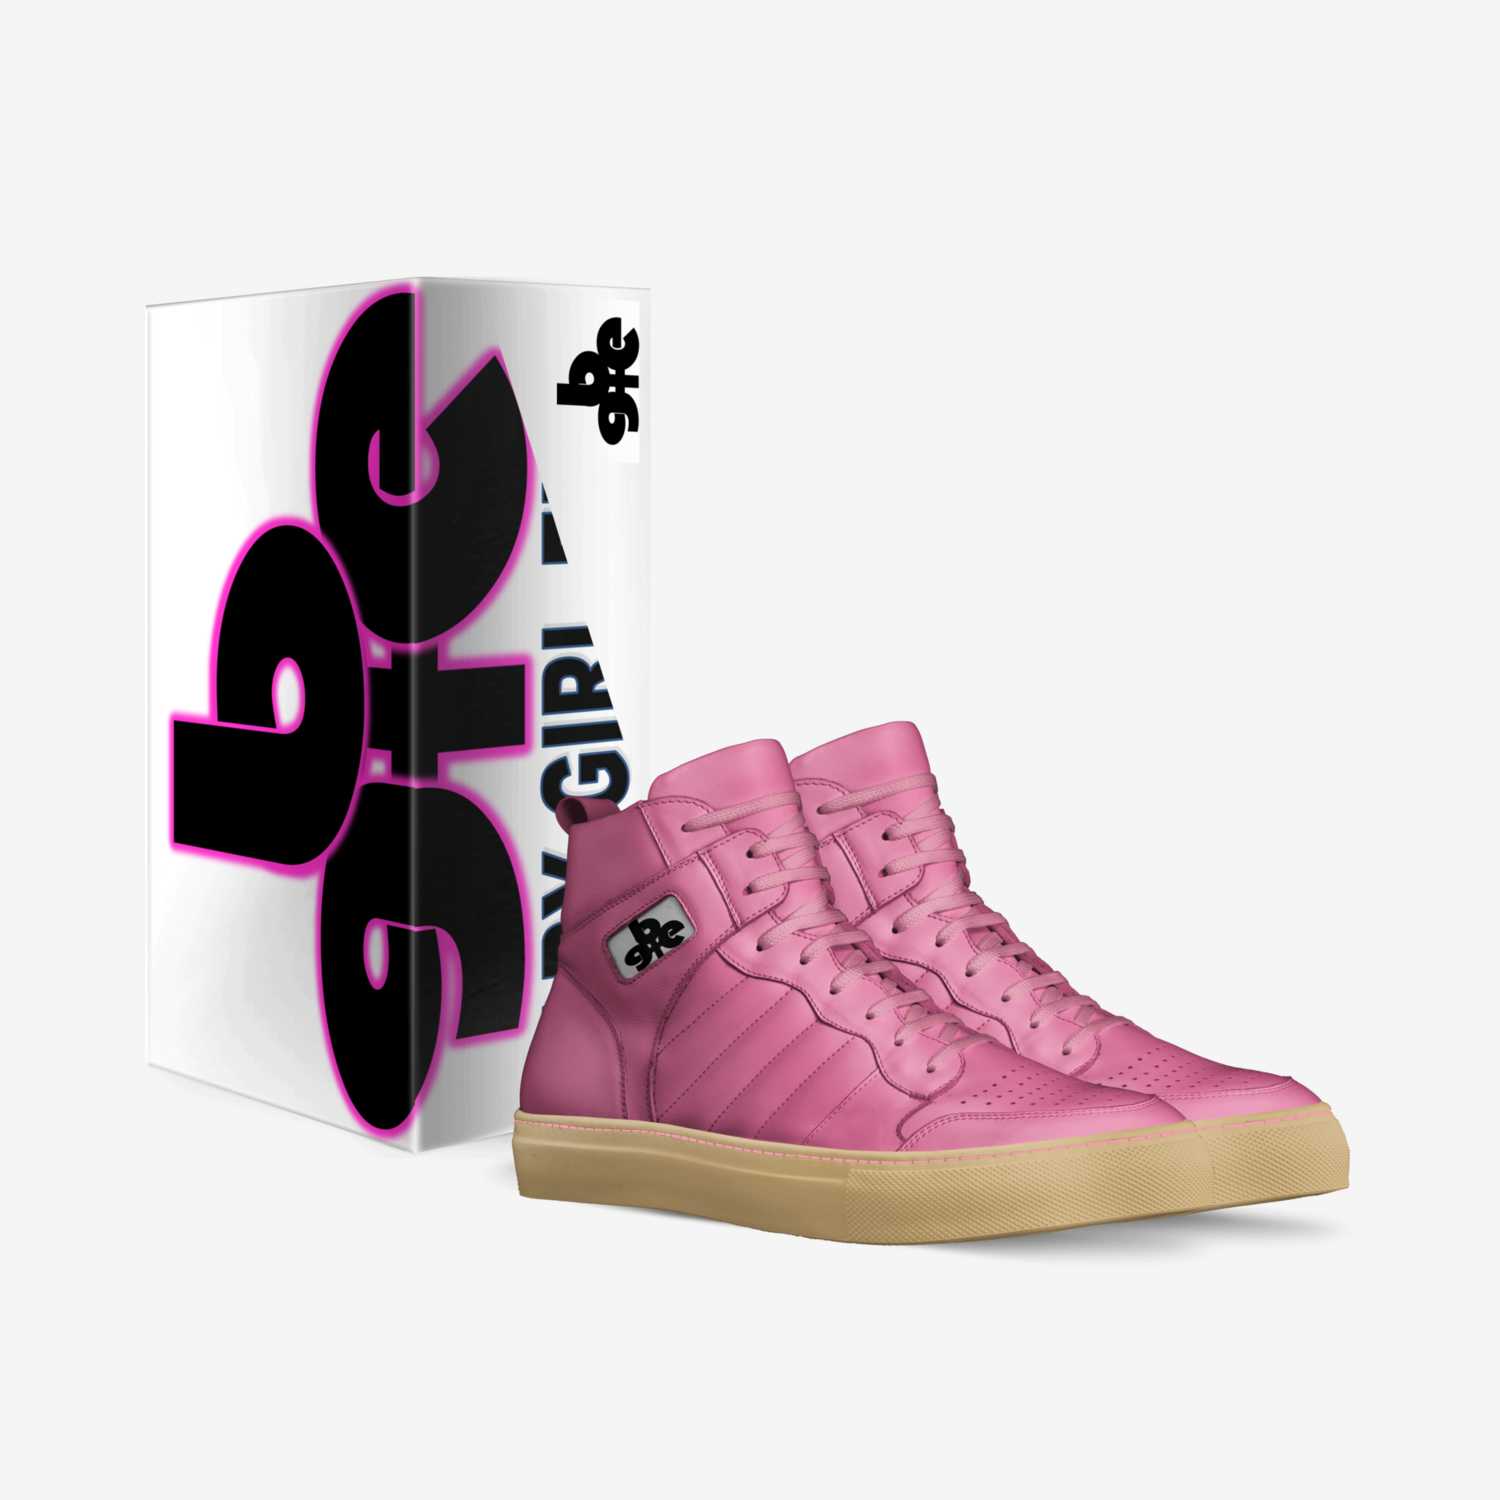 School 6 SJ1 Salto custom made in Italy shoes by Baby-girl Elite | Box view